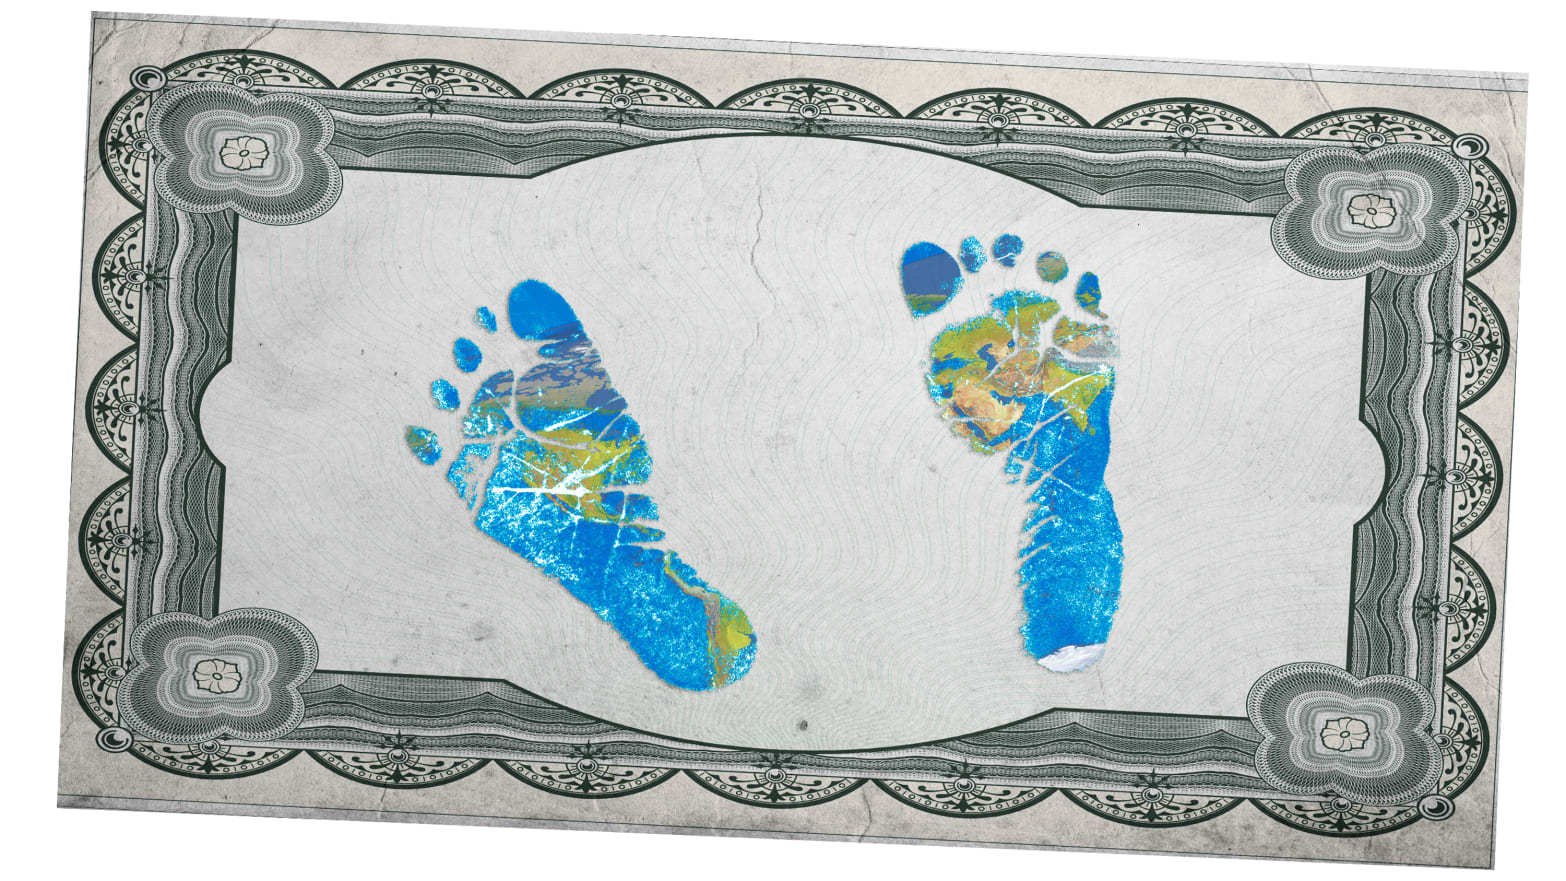 illustration of birth certificate border with baby feet footprint footprints within in blue and green earth colors climate change global warming fertility baby babies how many more colombia switzerland demography